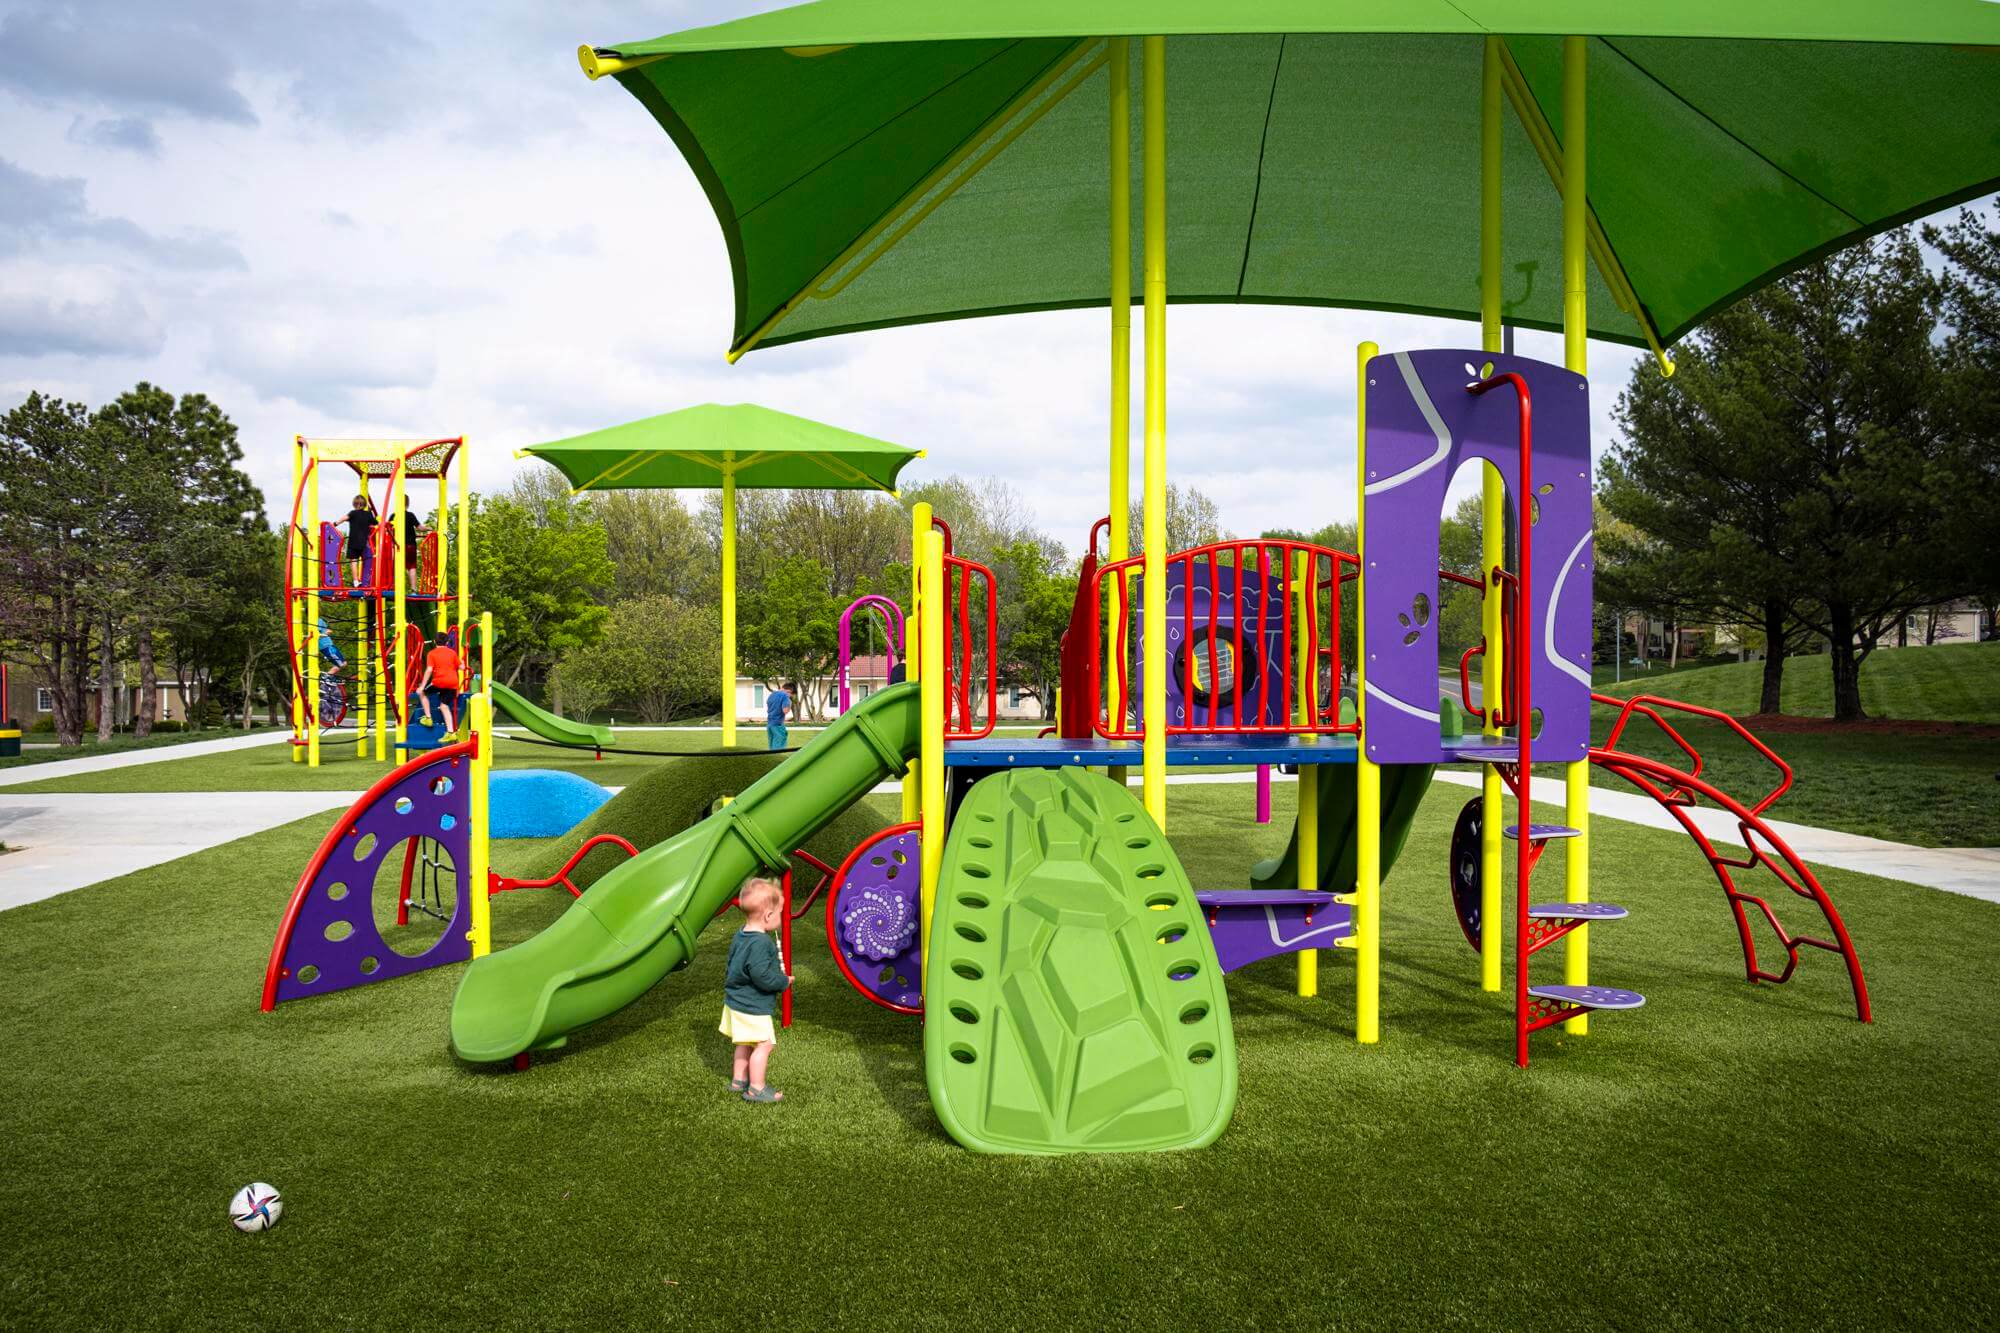 Colorful playground with green synthetic turf, featuring a slide and sunshades, with a child standing nearby.